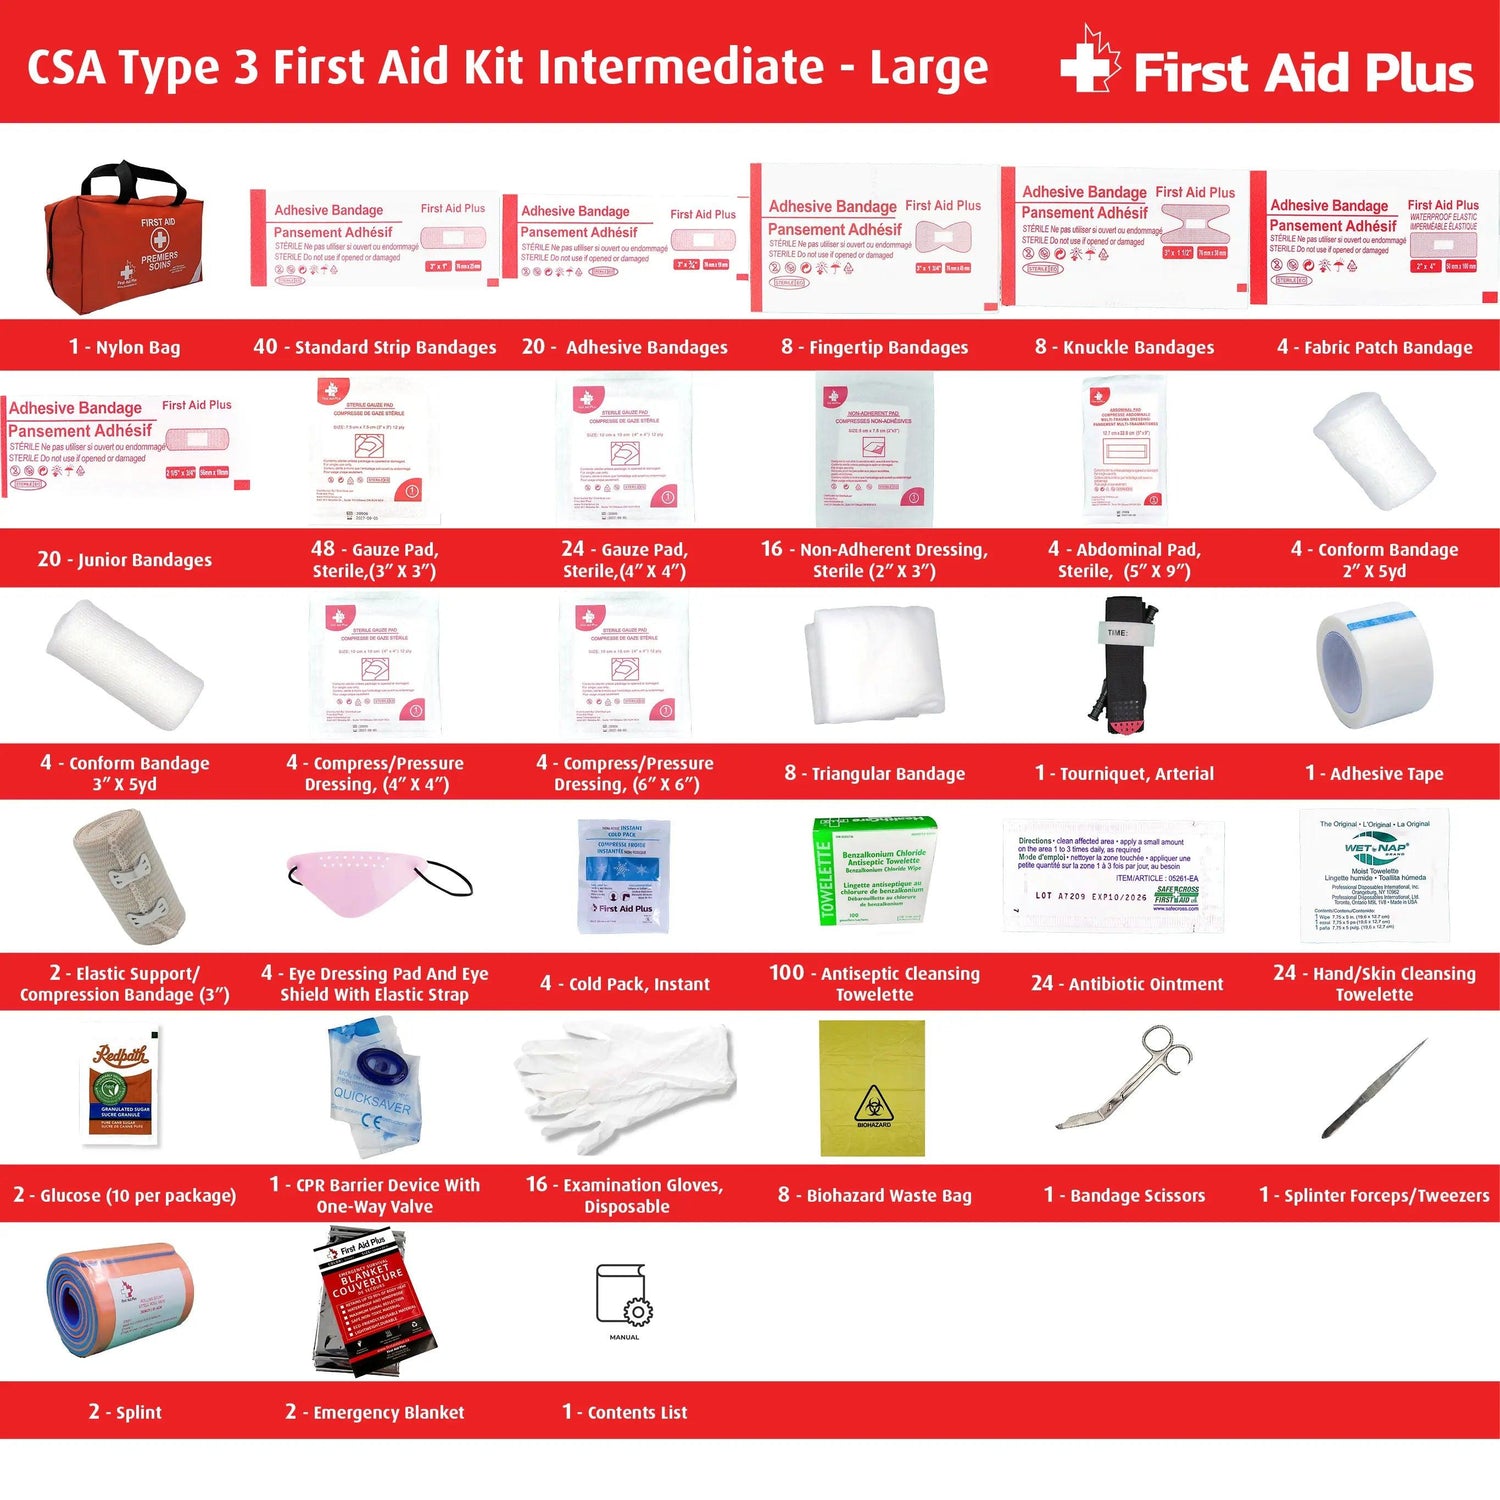 CSA Type 3 Intermediate First Aid Kit - Large (51-100 Workers) - First Aid Plus